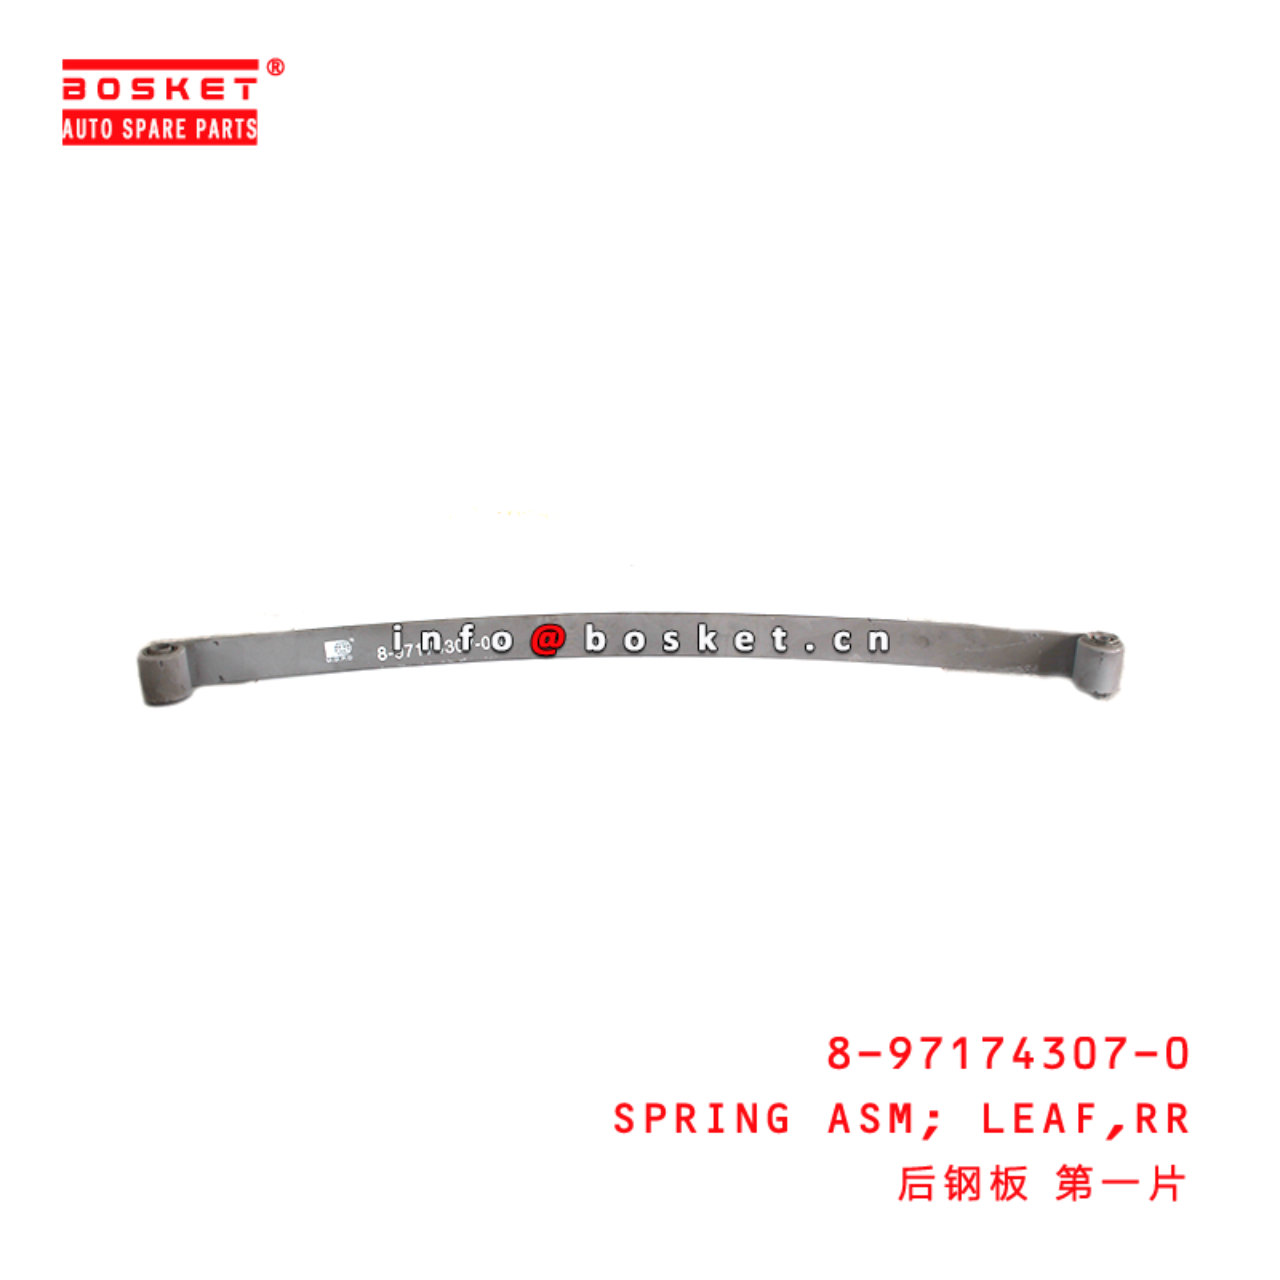 8-97174307-0 Rear Leaf Spring Assembly Suitable fo...